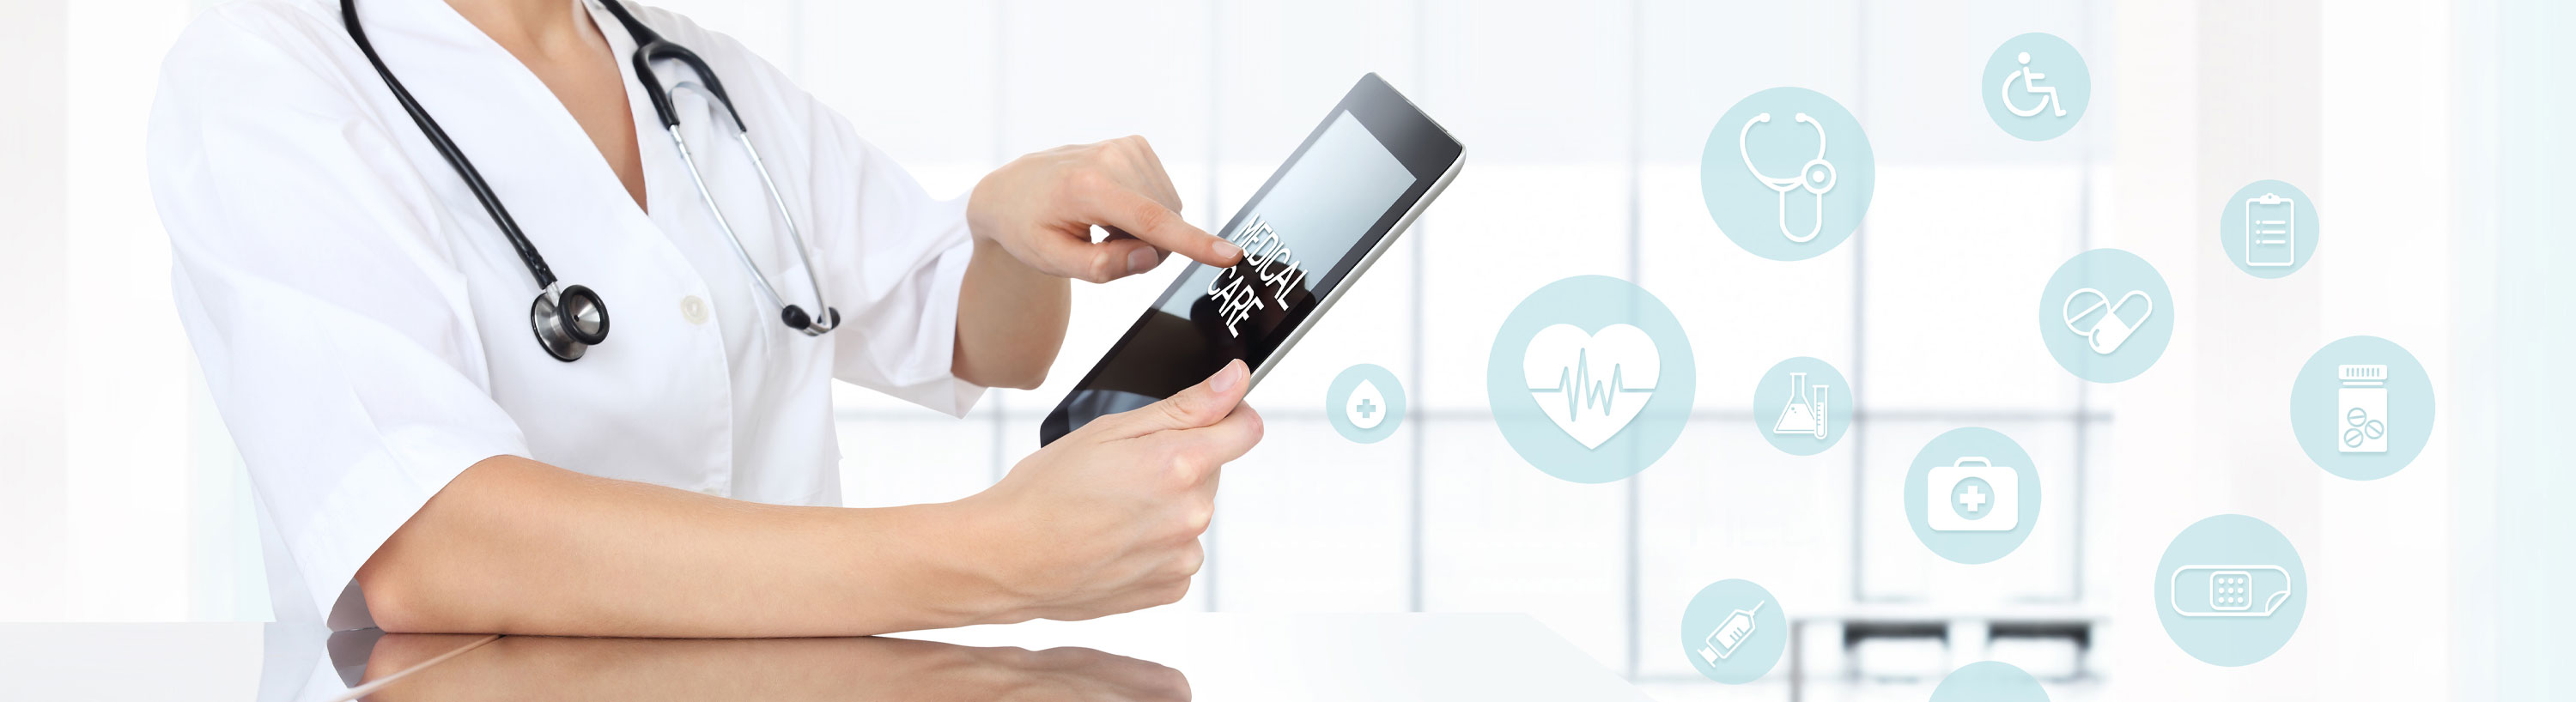 Banner picture of a female physician holding a tablet that says "MEDICAL CARE" on the screen. She has a stethoscope around her neck. 
There is circle icons with medical images in each circle.